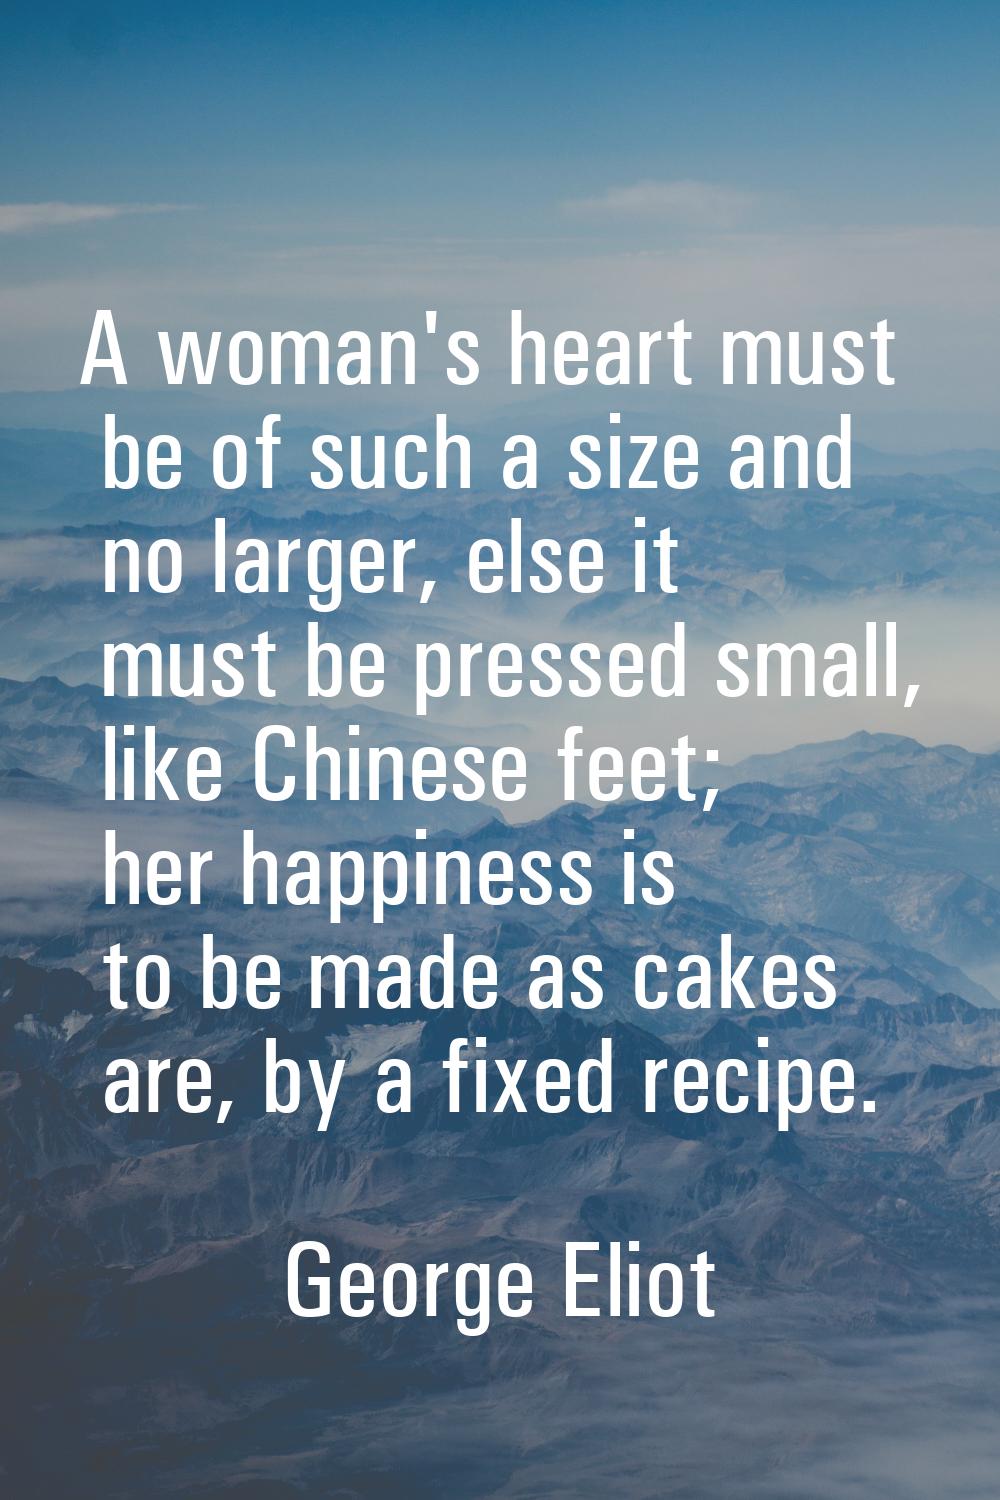 A woman's heart must be of such a size and no larger, else it must be pressed small, like Chinese f